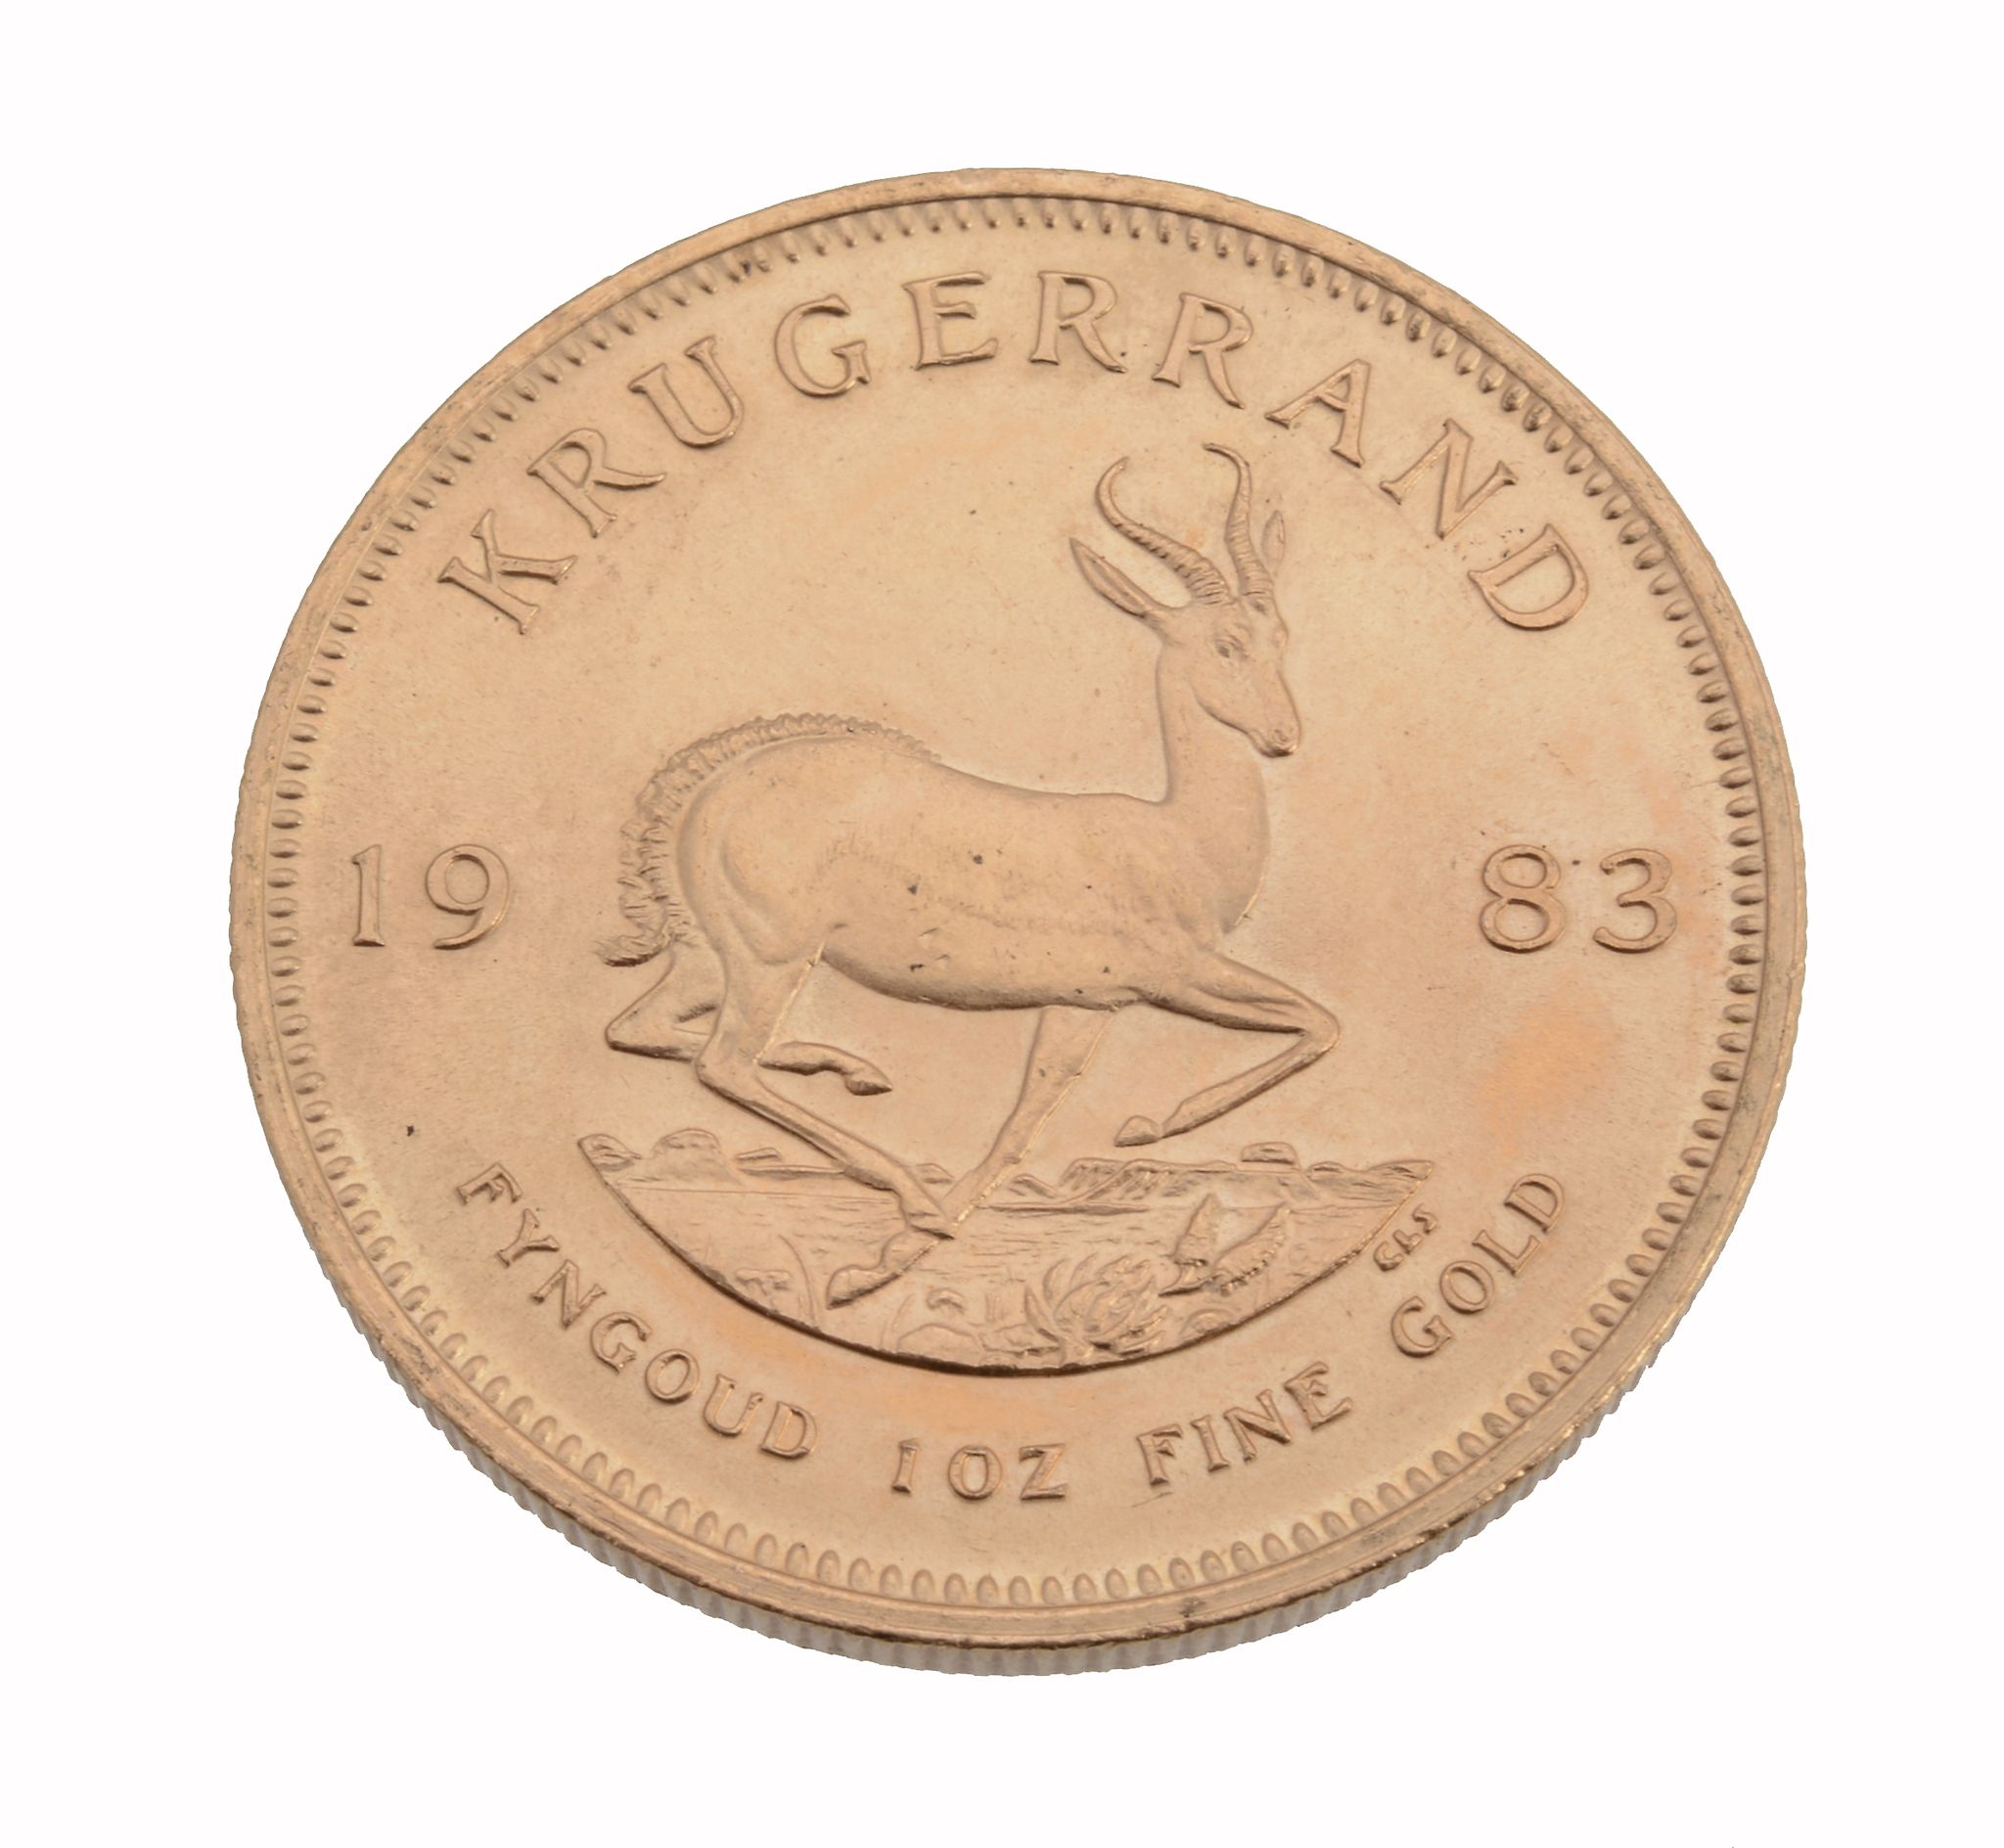 South Africa, gold Krugerrand 1983. Extremely fine - Image 2 of 2